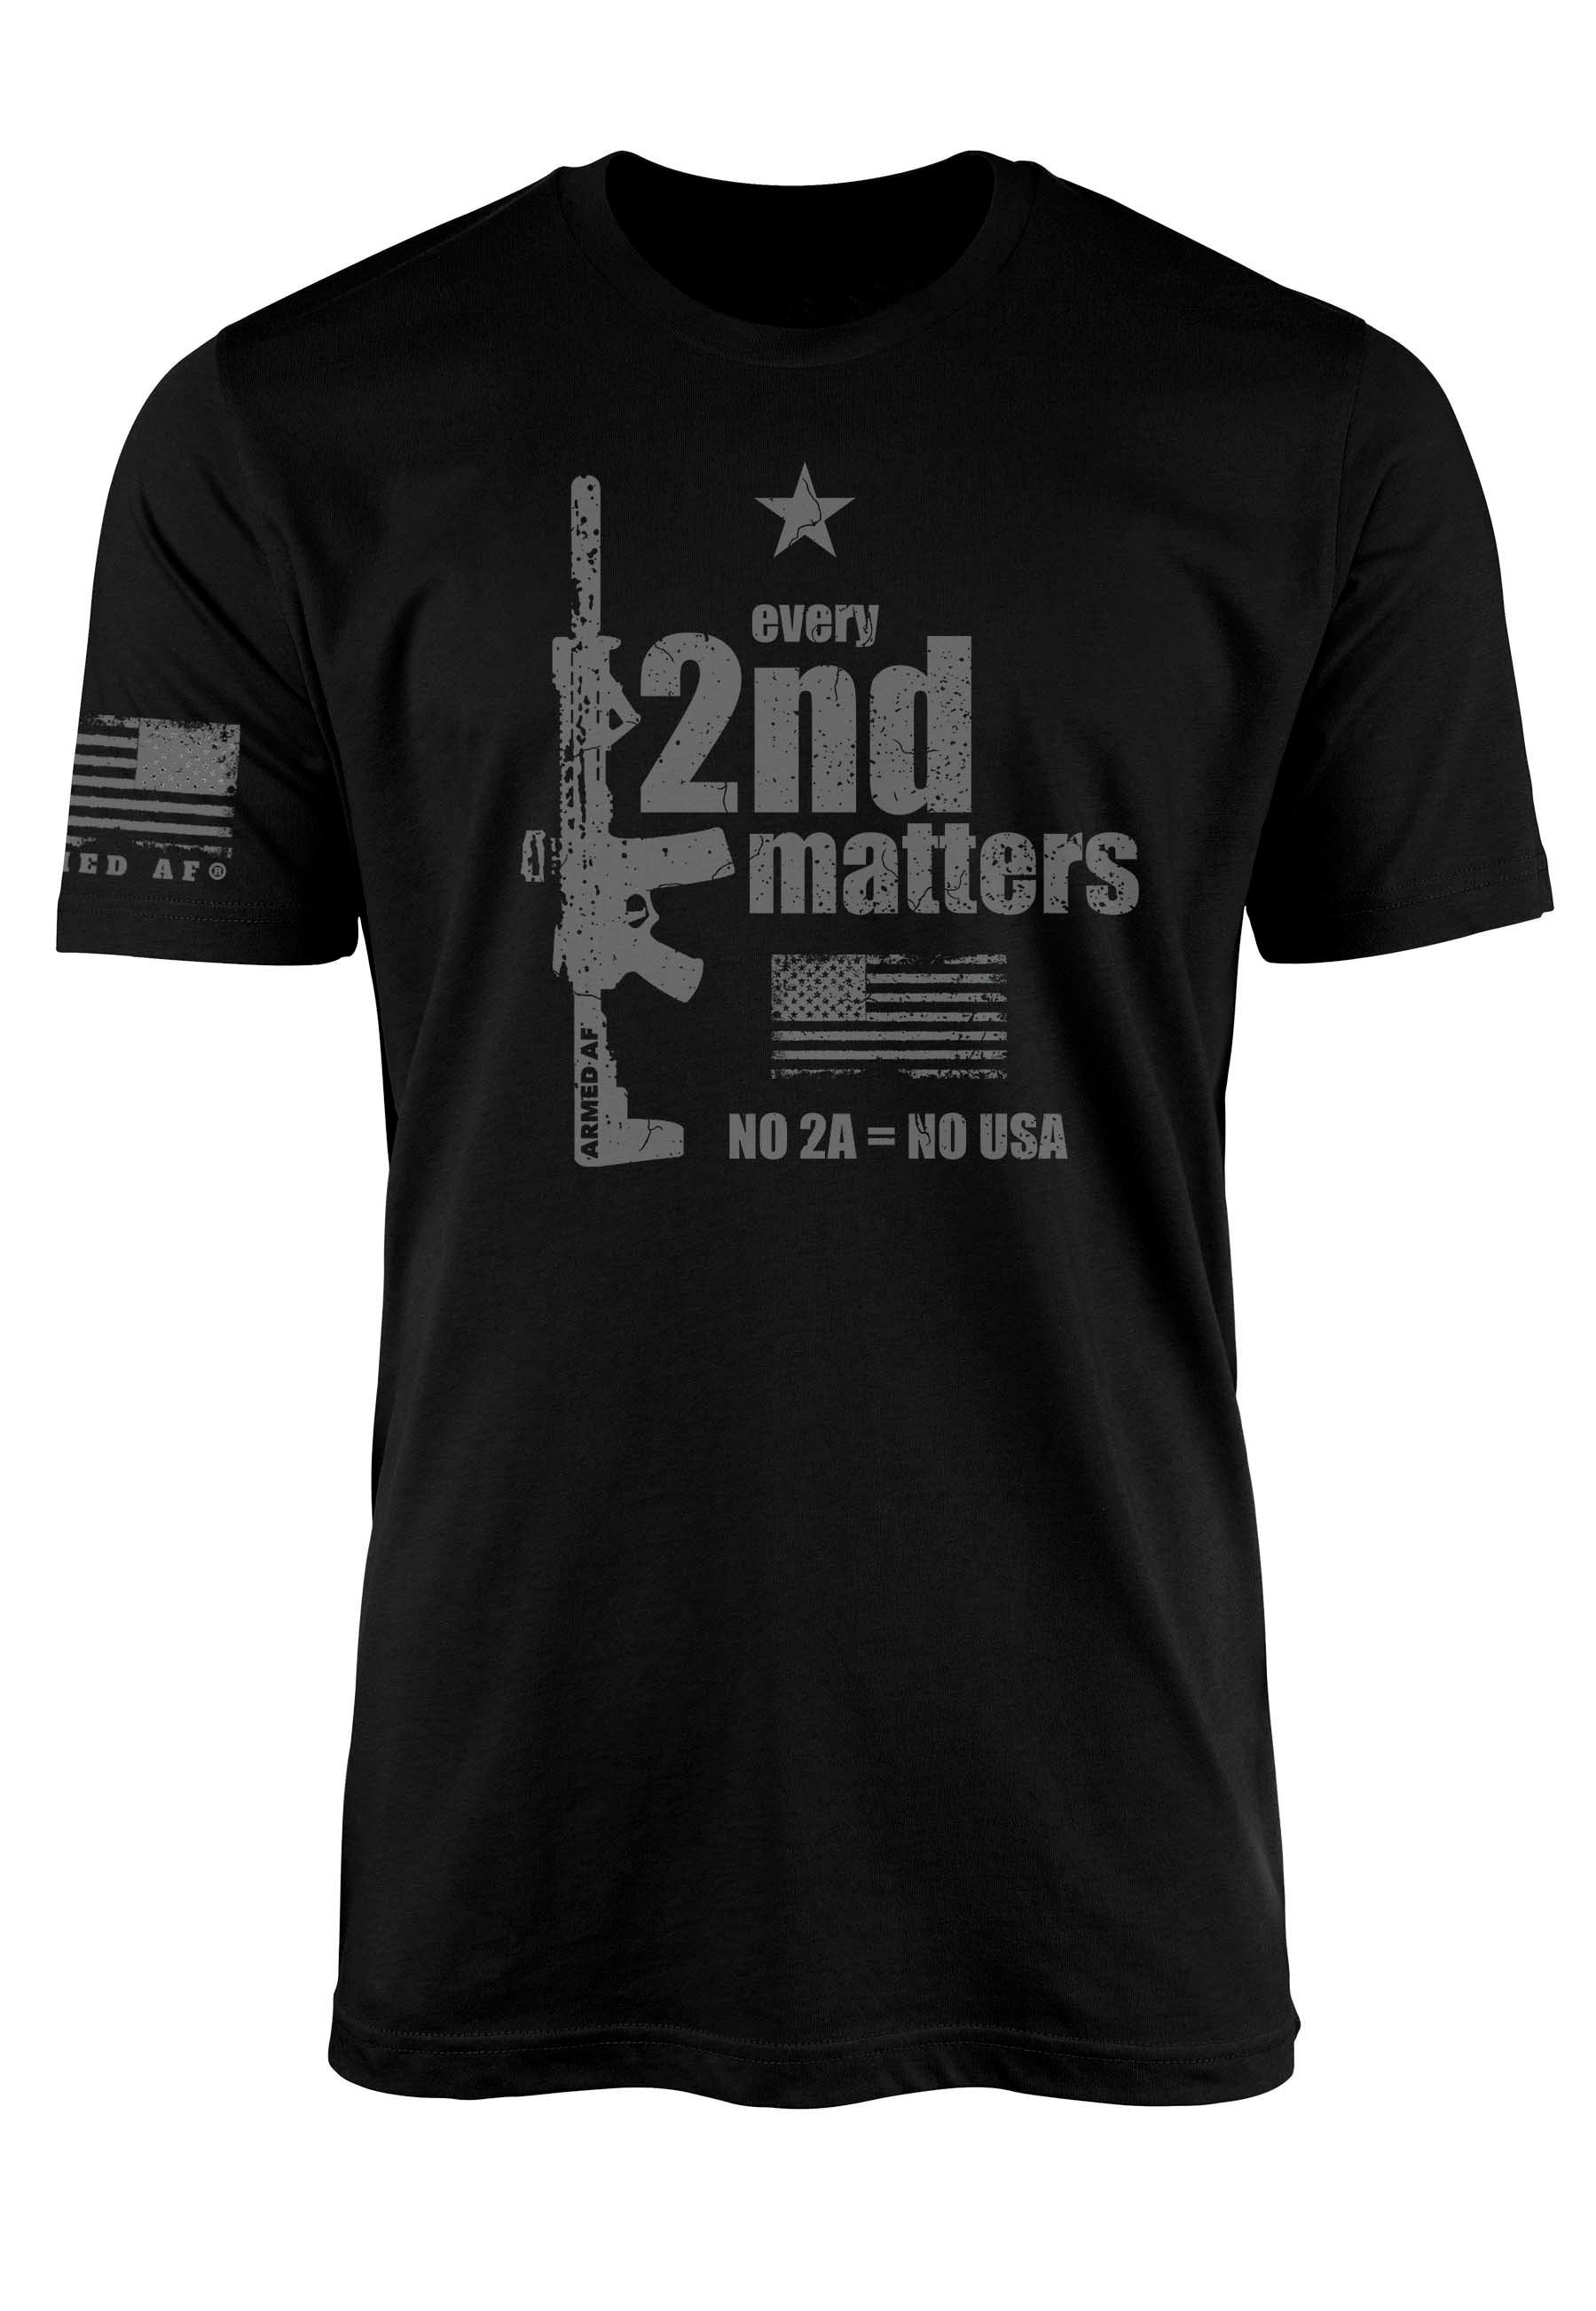 Every Second Matters t-shirt print on front